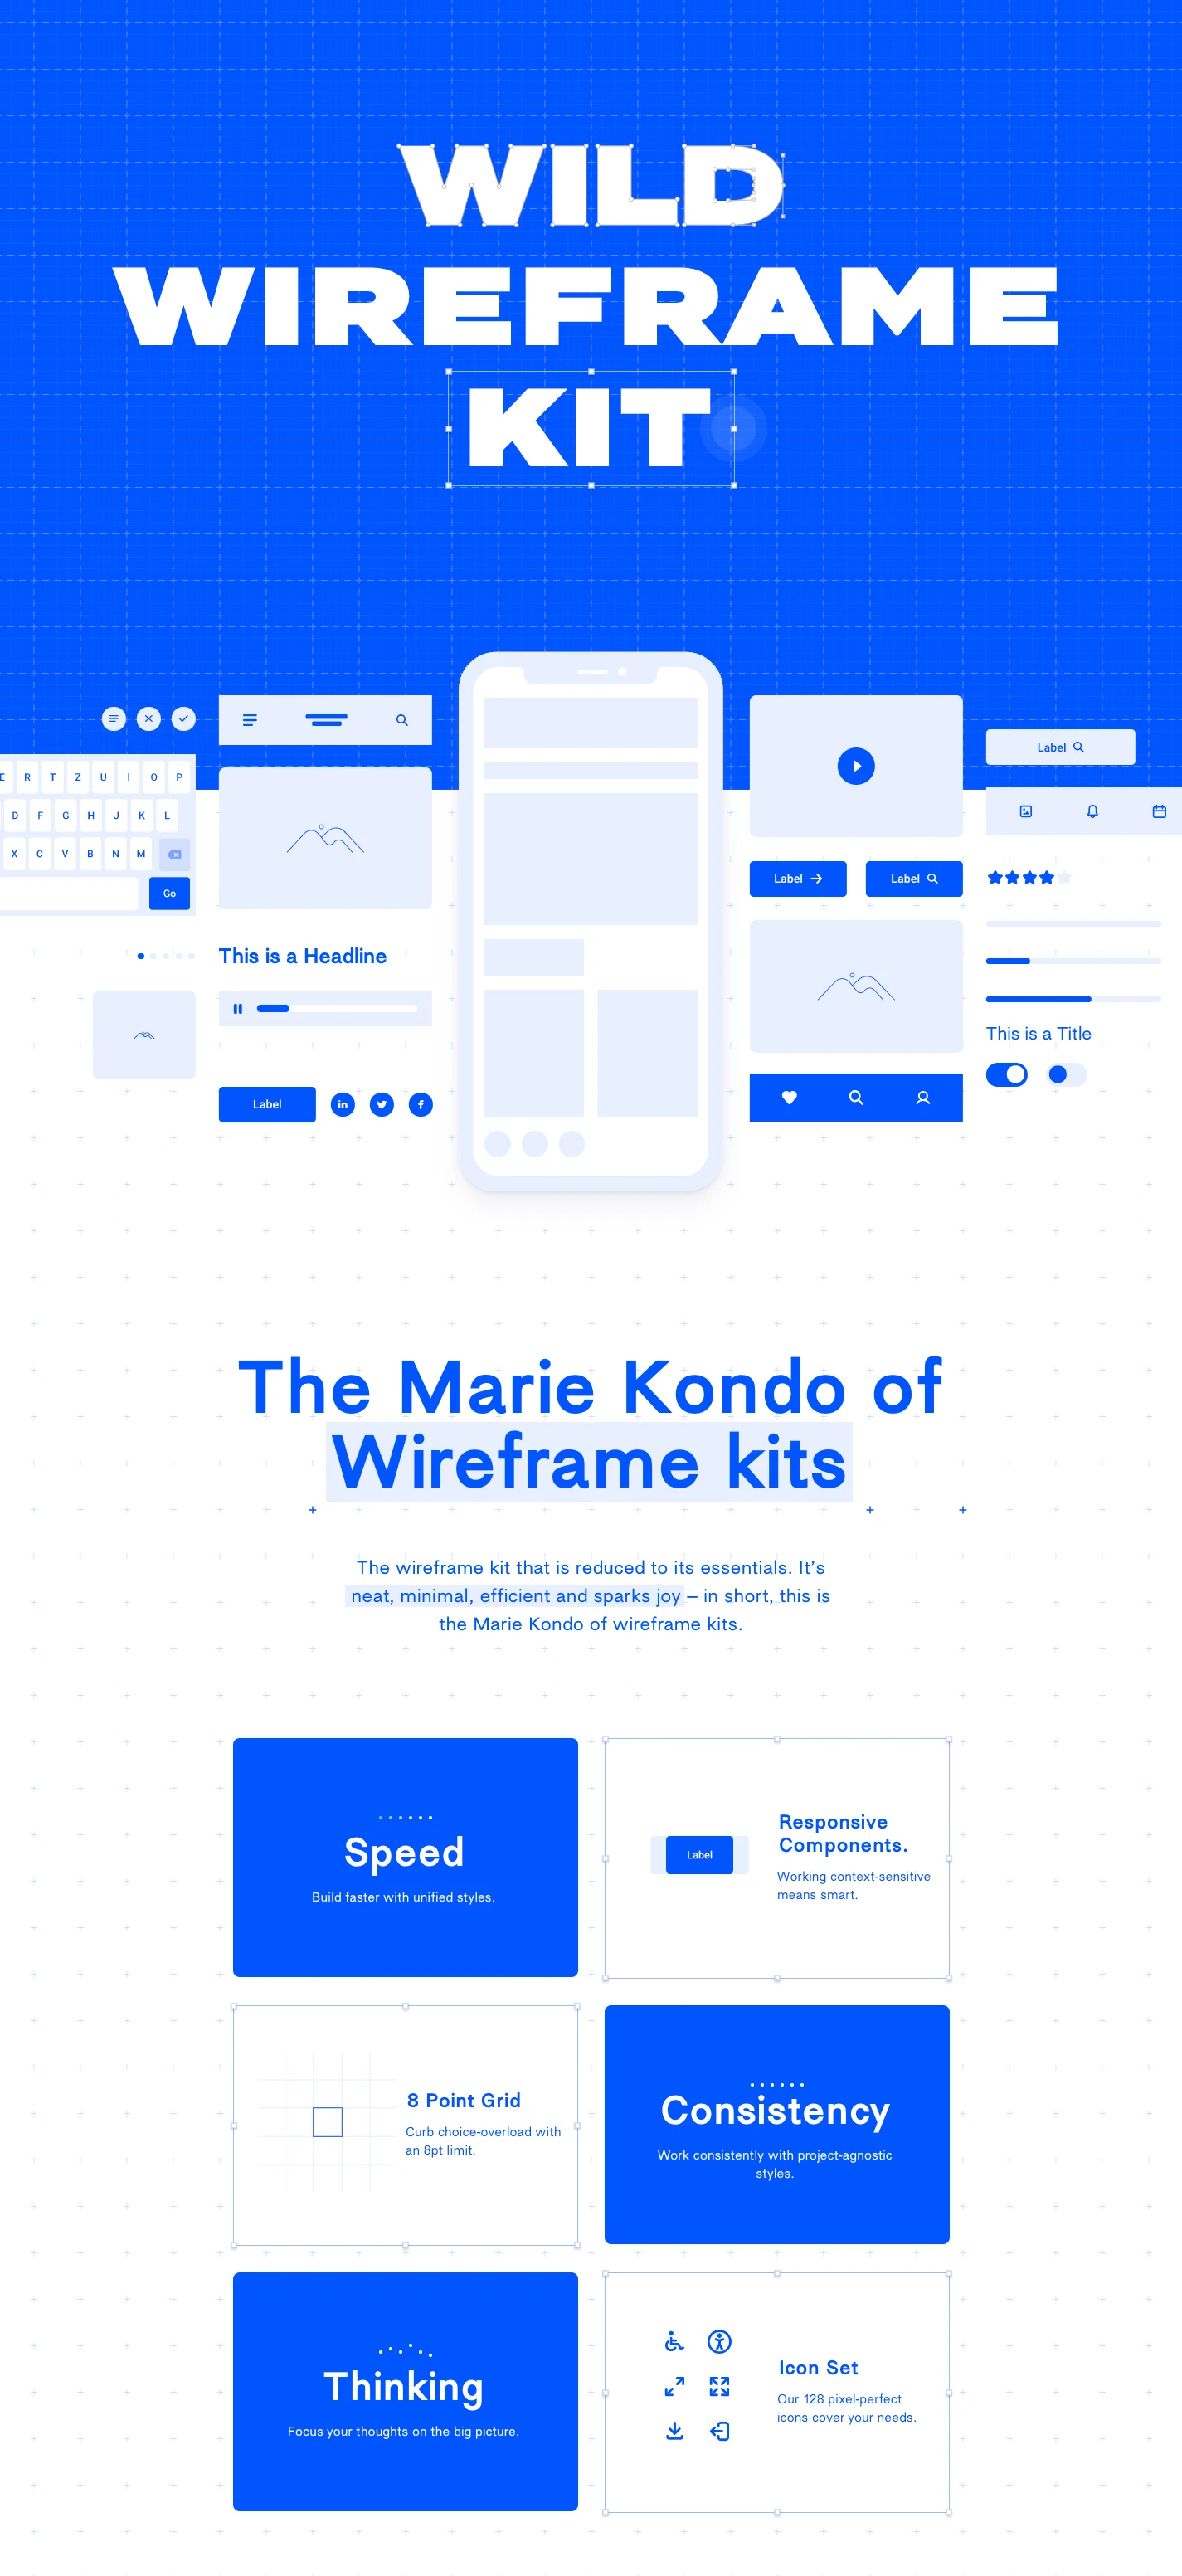 Wild Wireframe Kit for Sketch - The wireframe kit that is reduced to its essentials. It’s neat, minimal, efficient and sparks joy – in short, this is the Marie Kondo of wireframe kits.